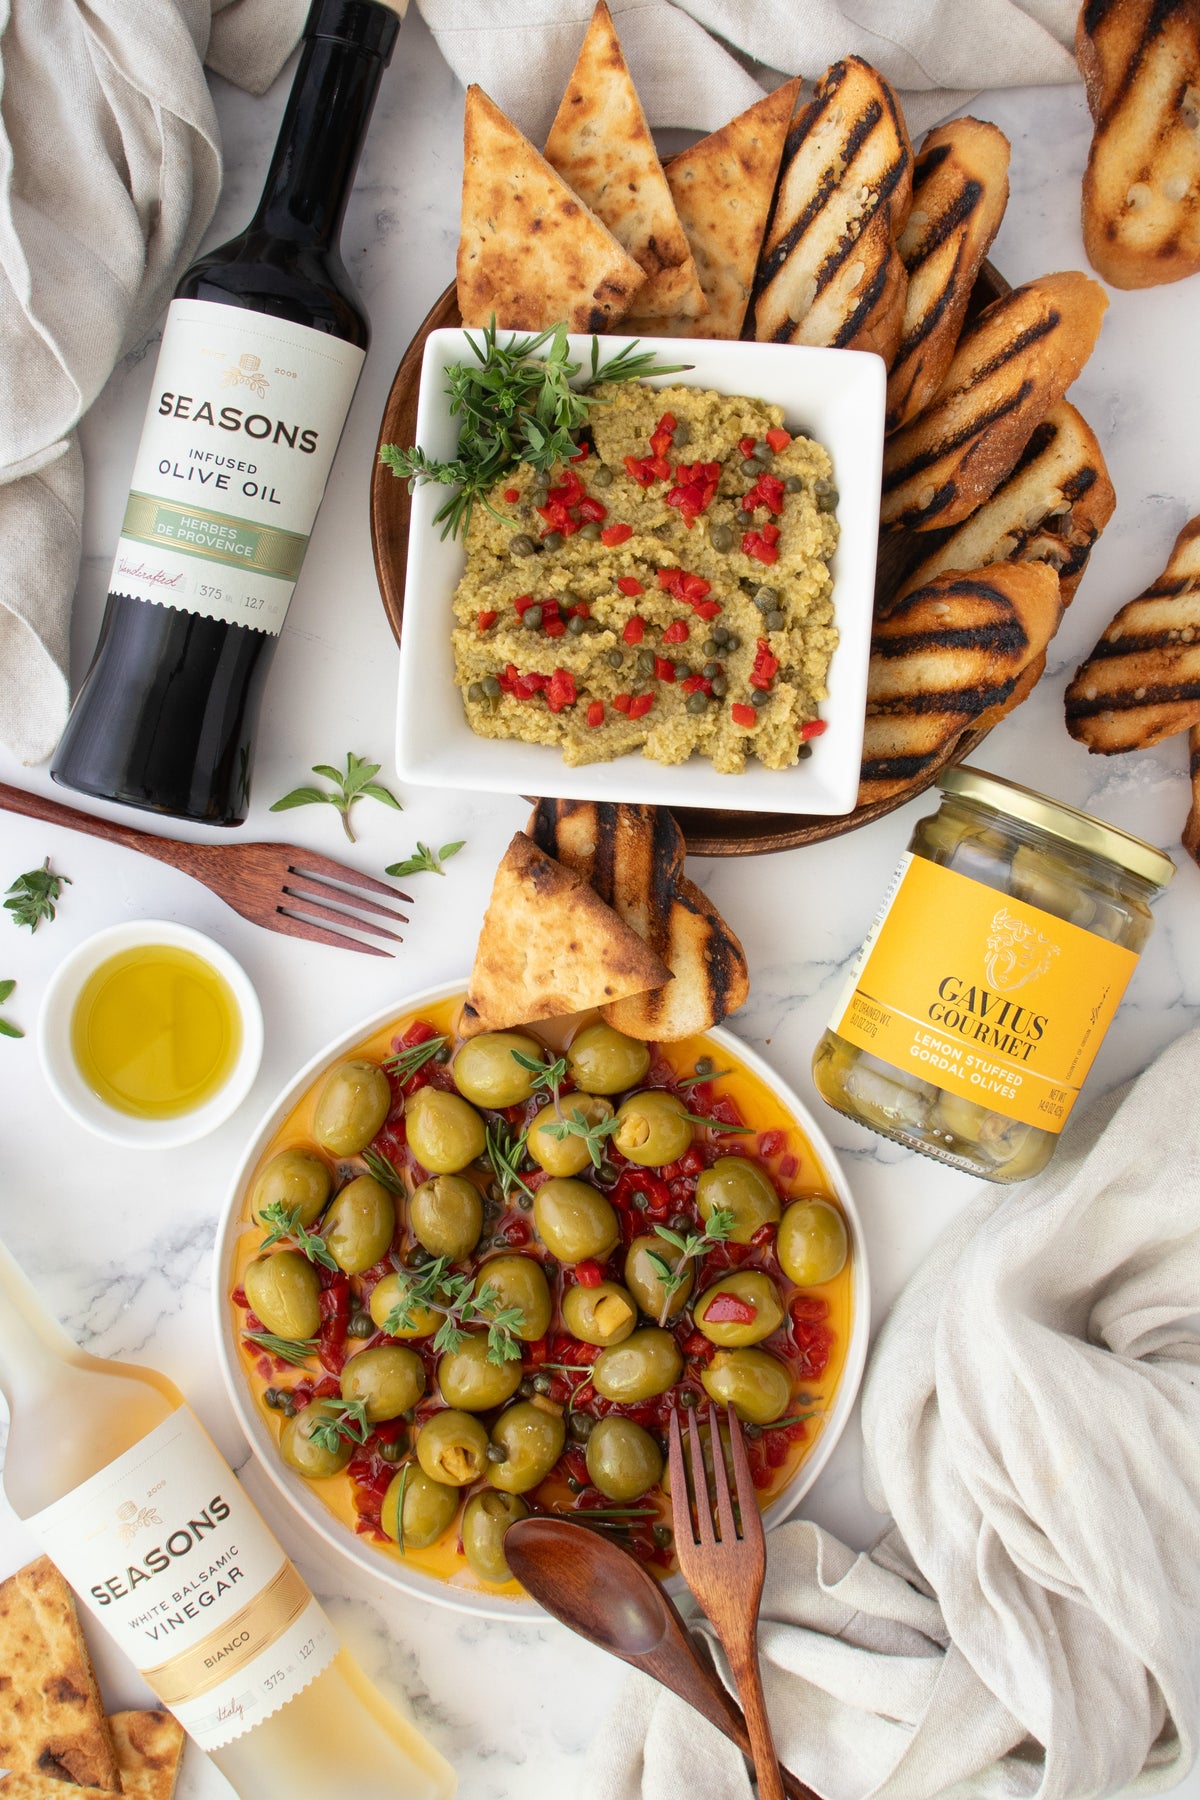 Olives de Provence Tapenade & Marinated Olive Duo